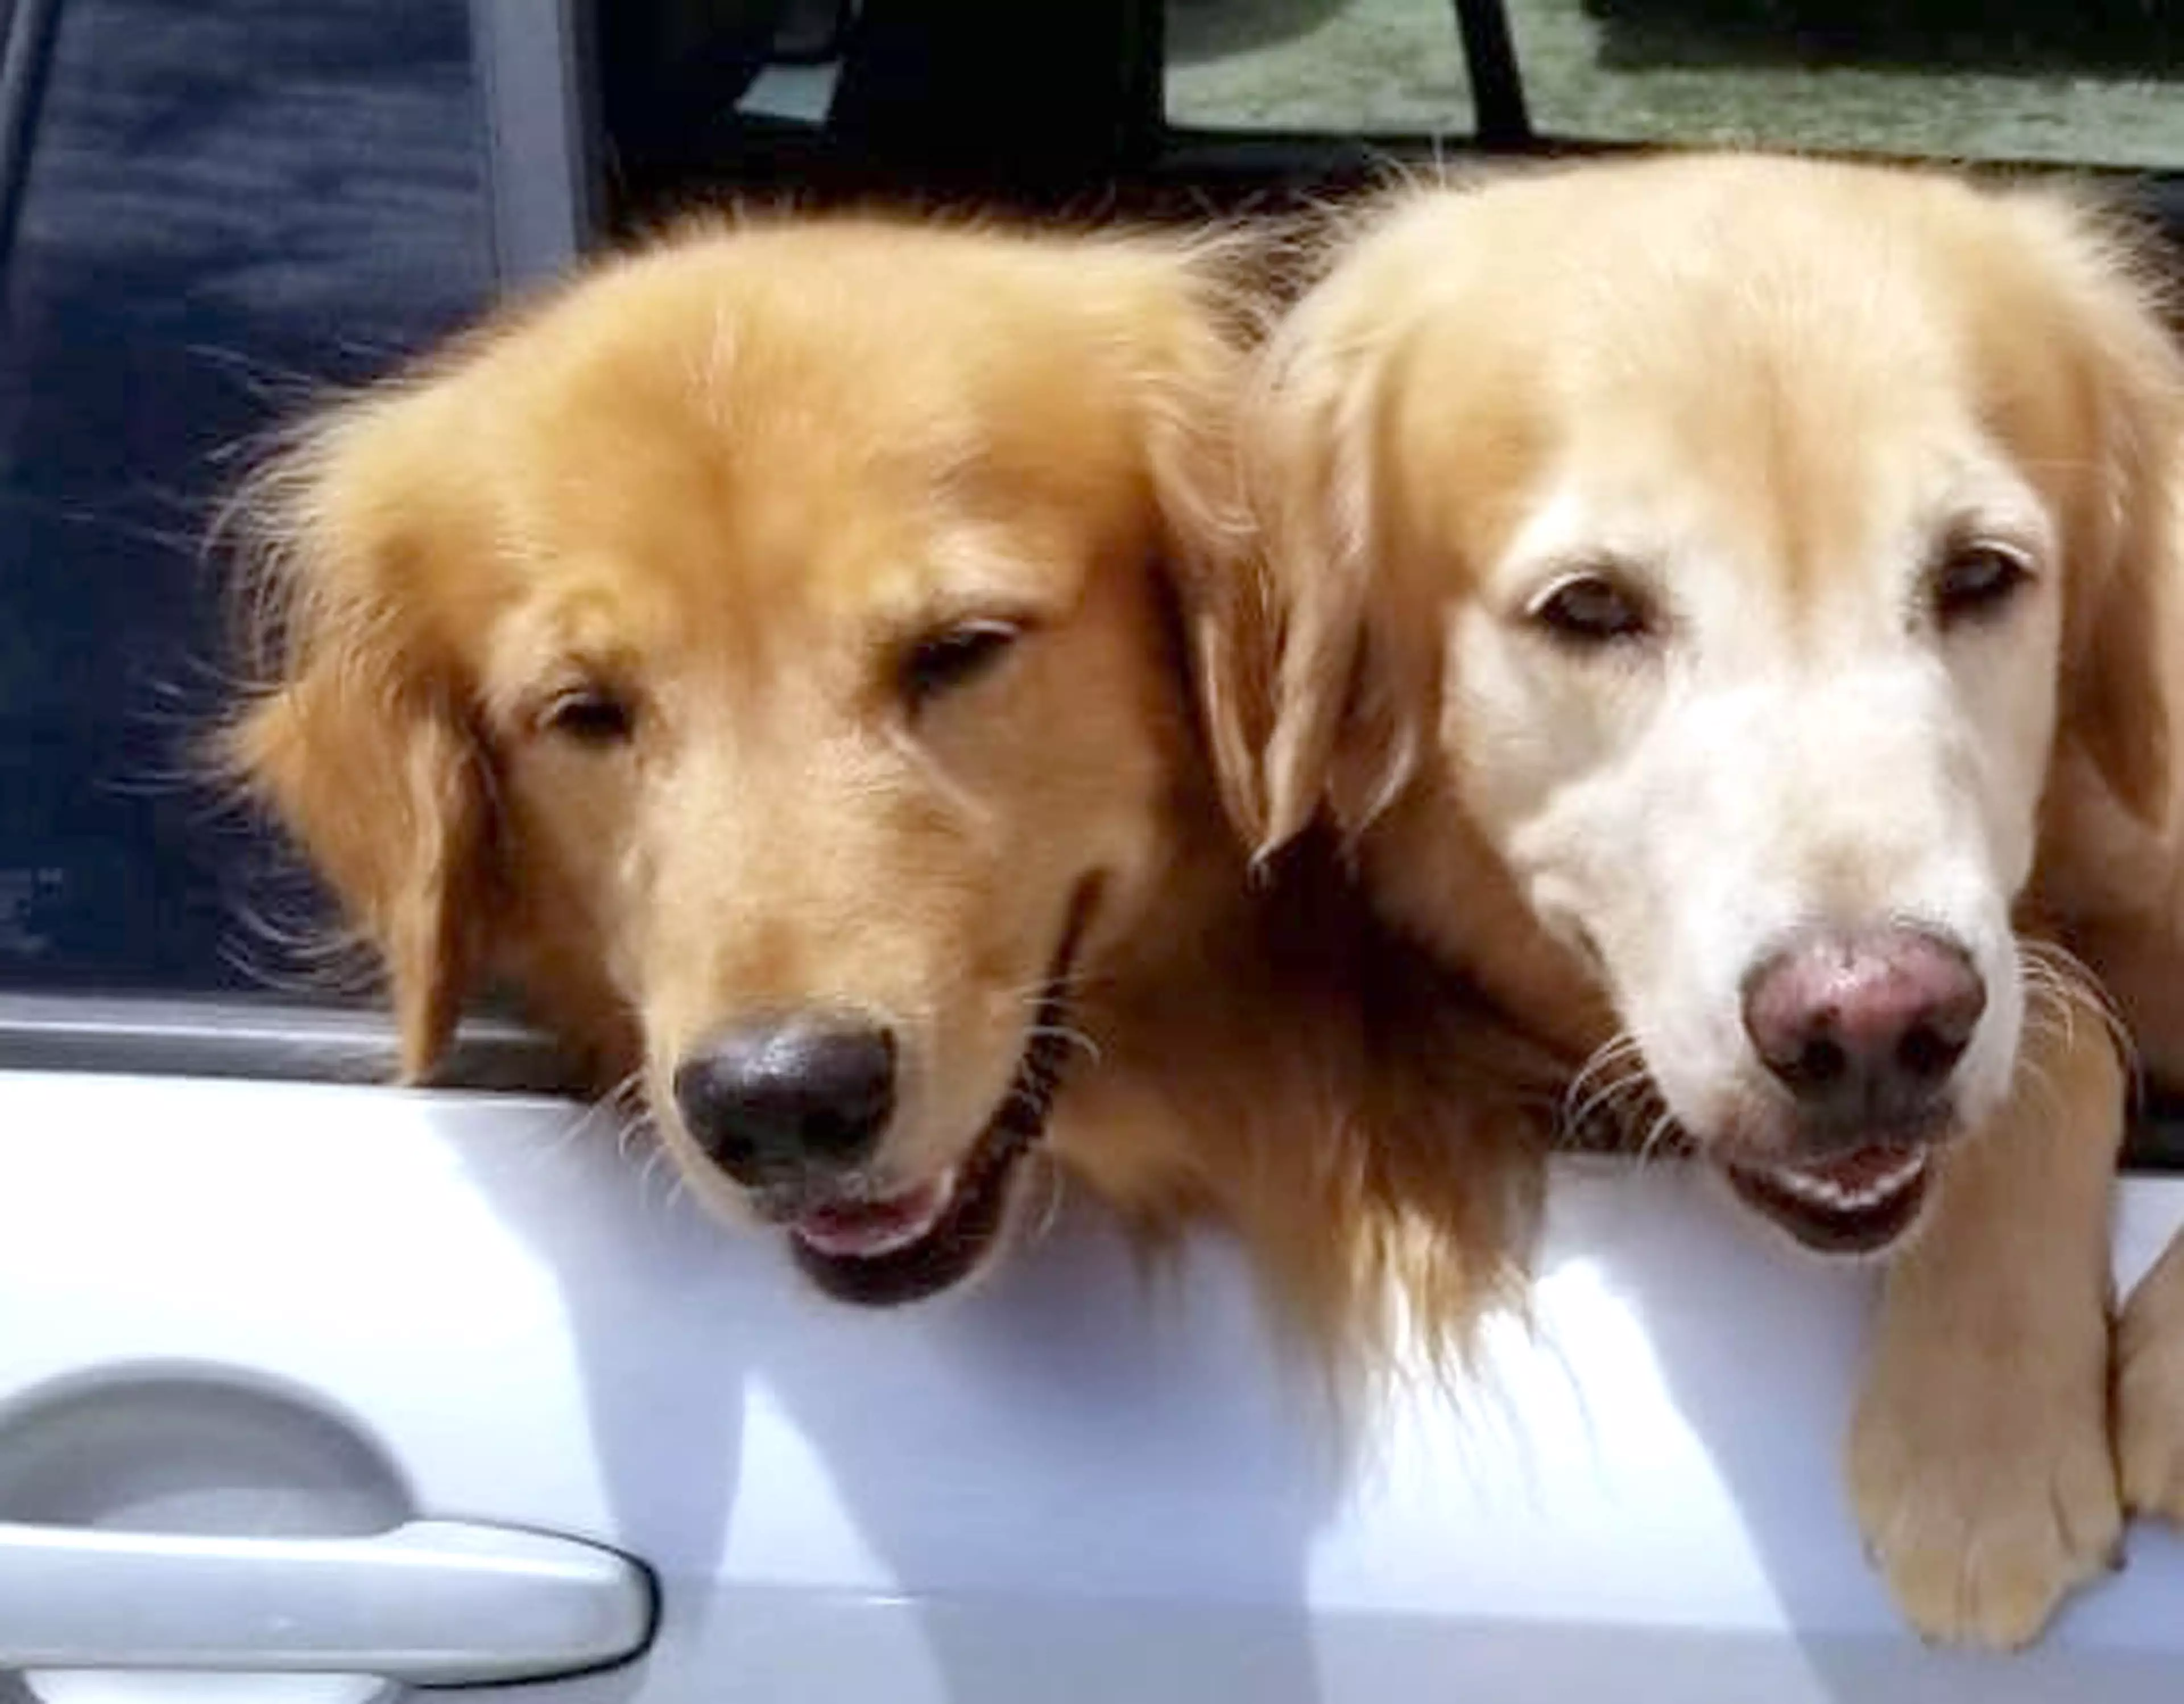 Finn and Nemo are the pair of randy golden retrievers who hilariously ruined a family portrait by getting it on in front of the camera.